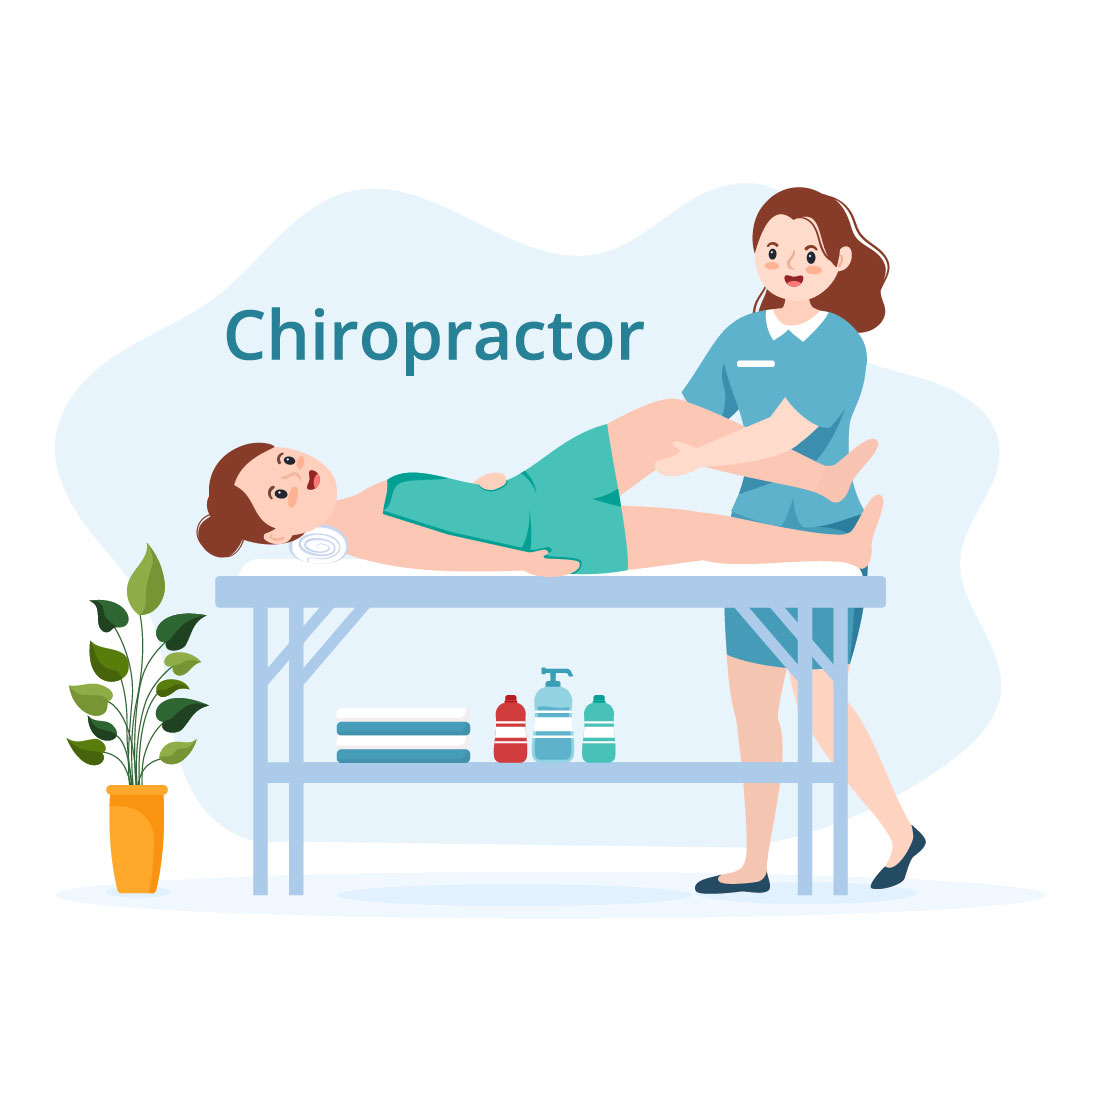 Chiropractor Physiotherapy Rehabilitation Illustration cover image.